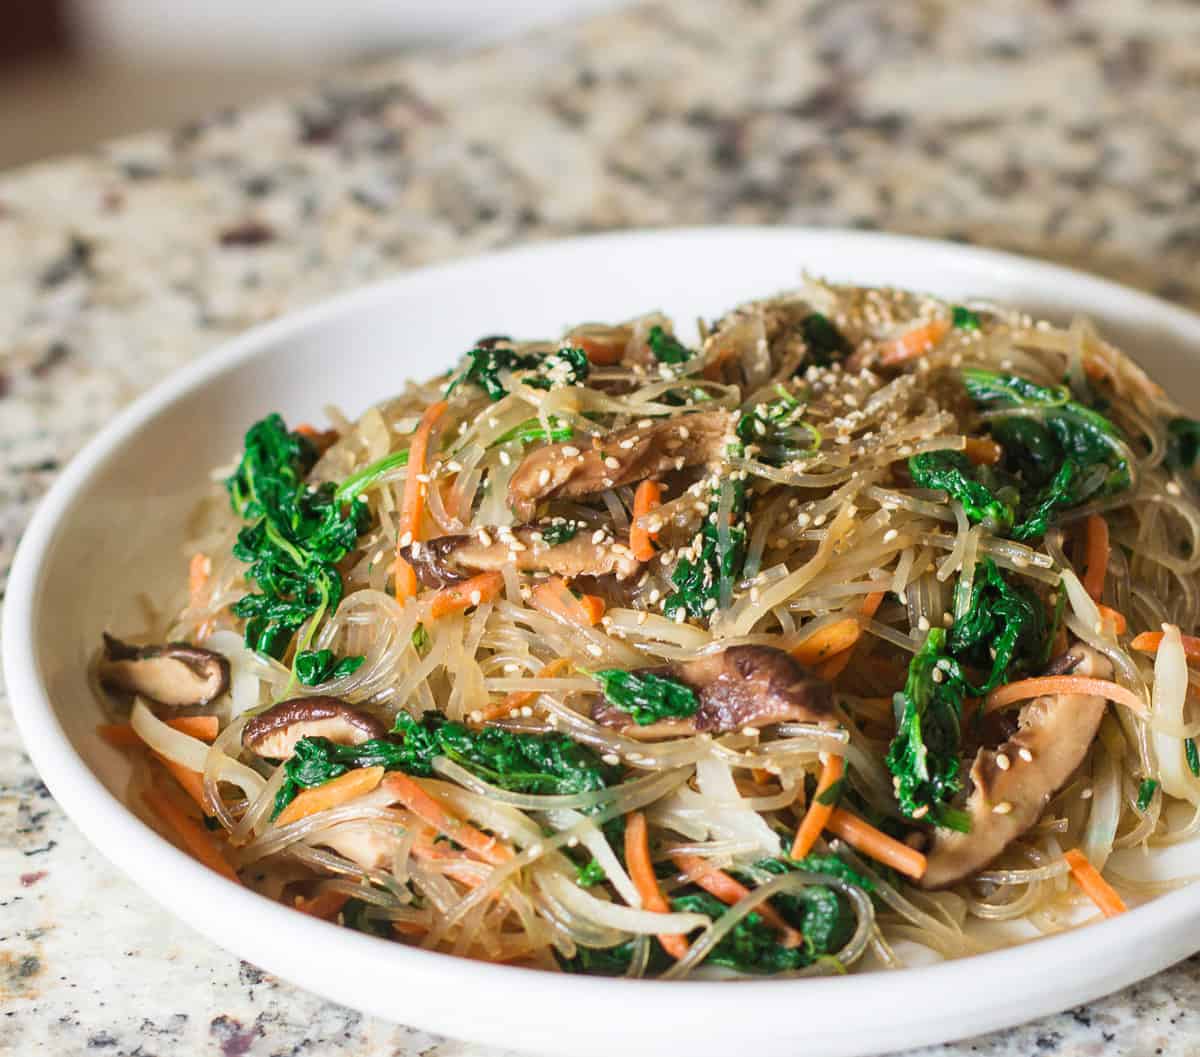 A side view of japchae in a large white plate.